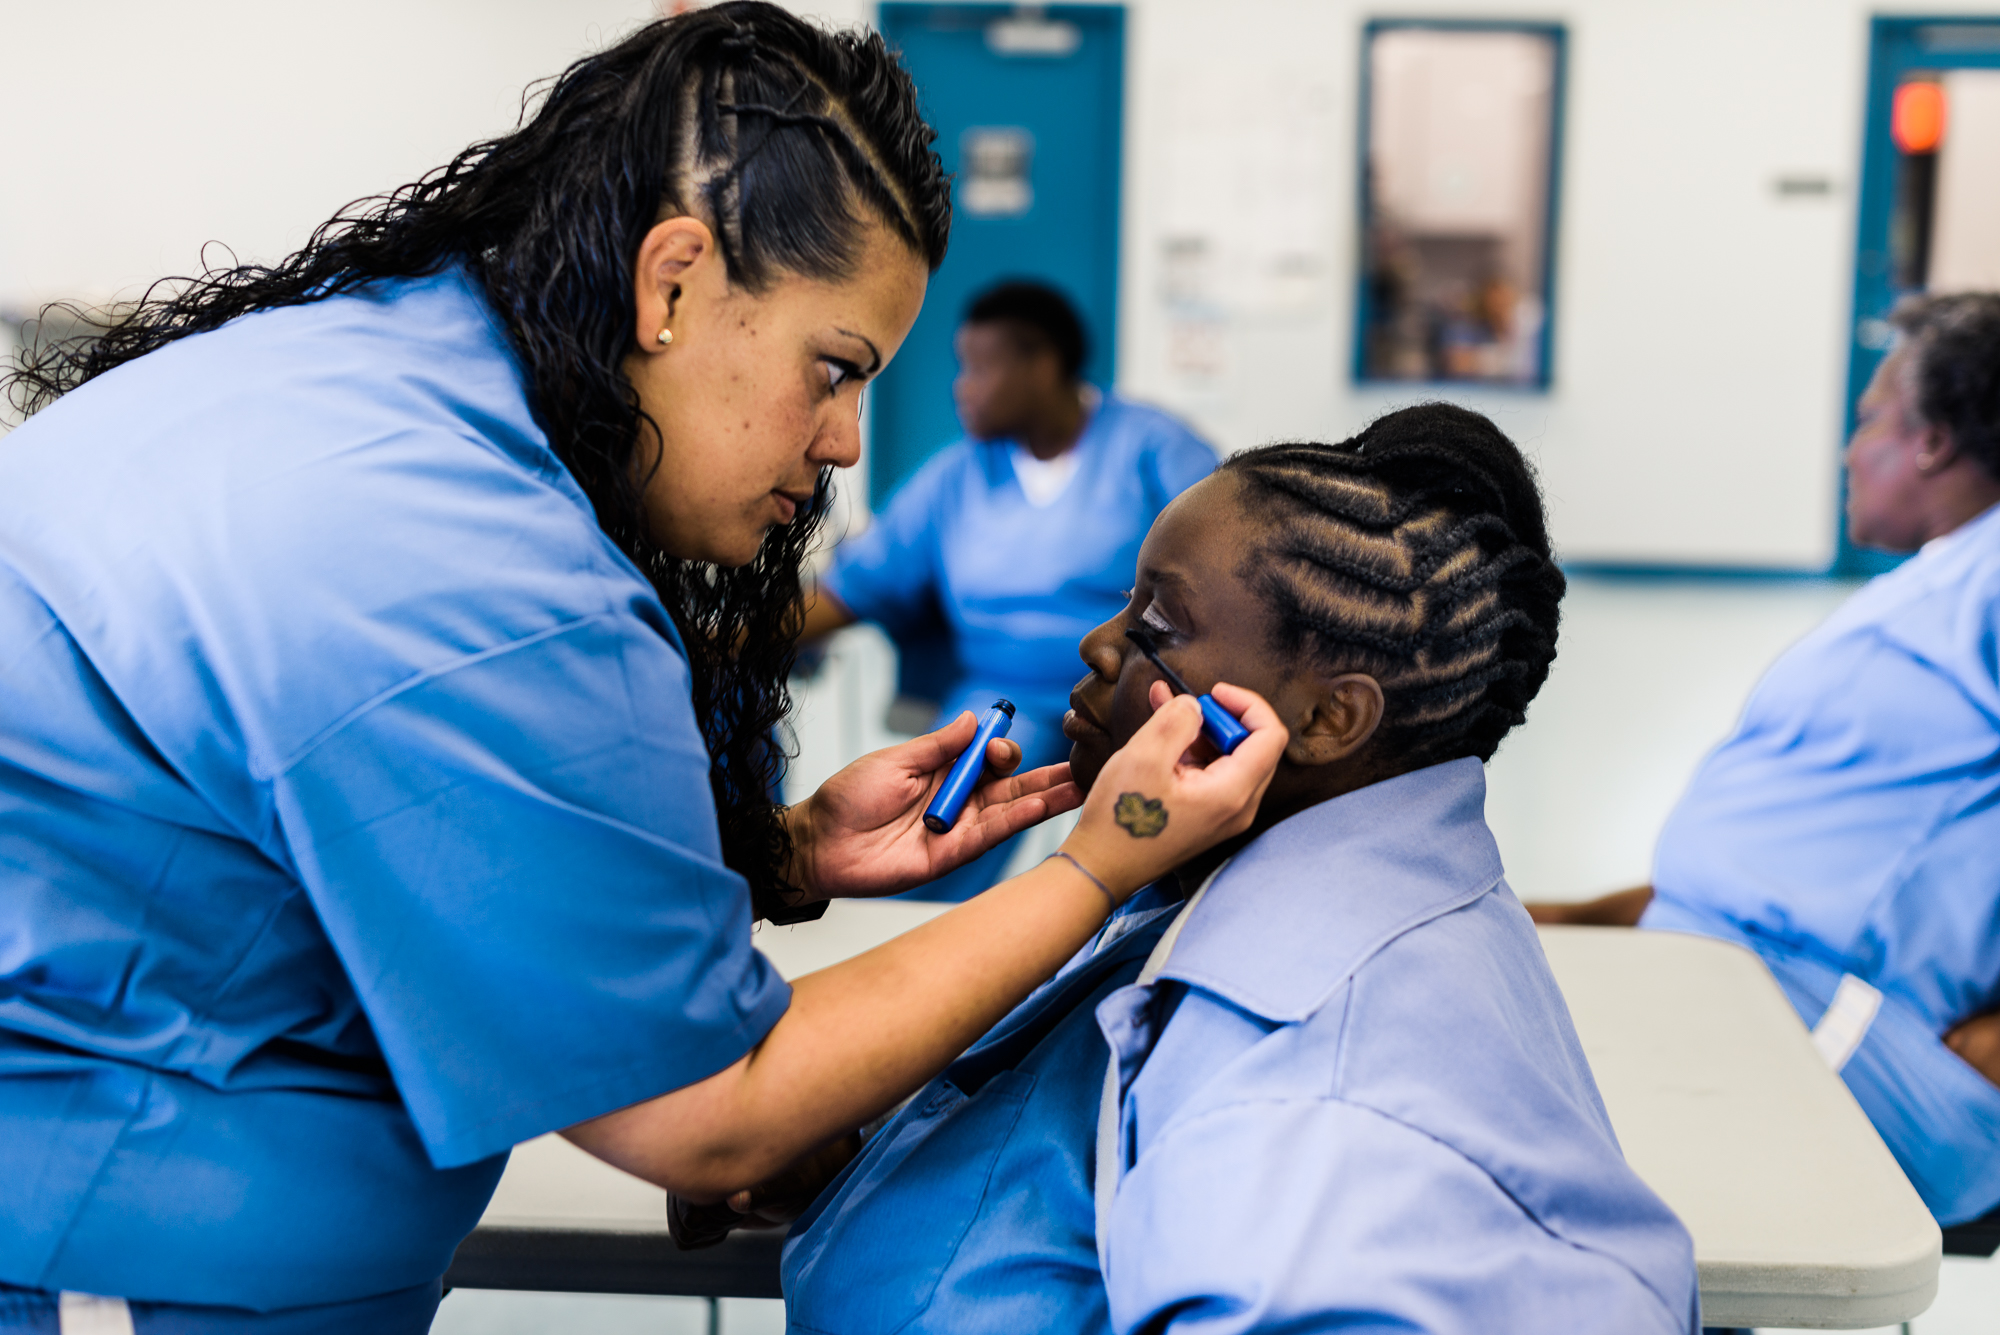  Jennissey puts eye makeup on Tashanika as they wait for their children to arrive at the Women’s Reception Center in Ocala, Florida. 